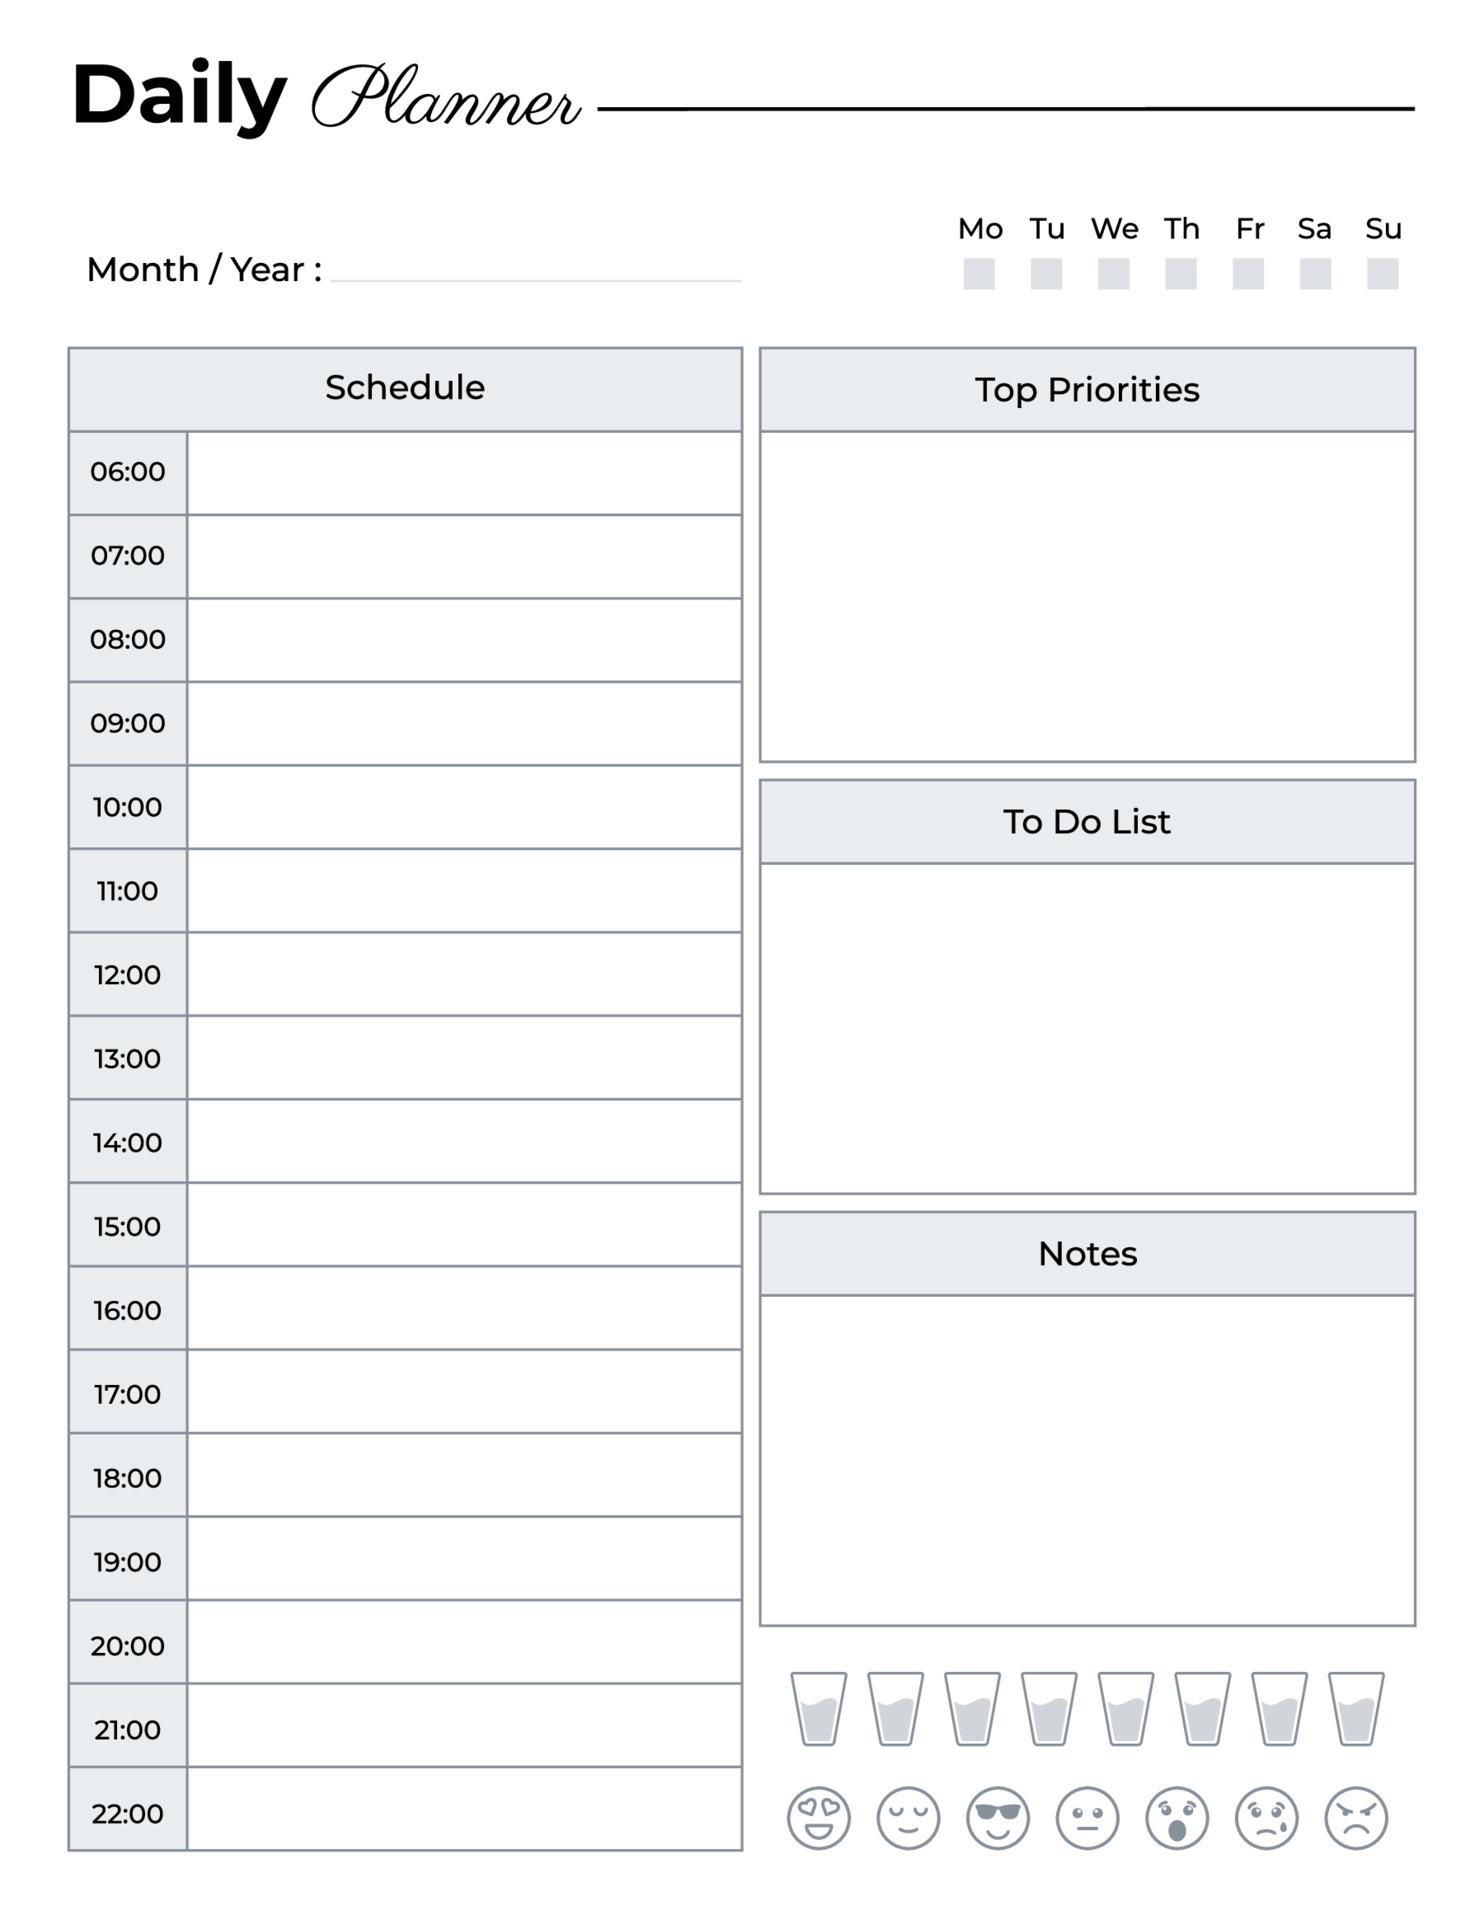 Daily planner template, Daily schedule planner 11763003 Vector Art at ...